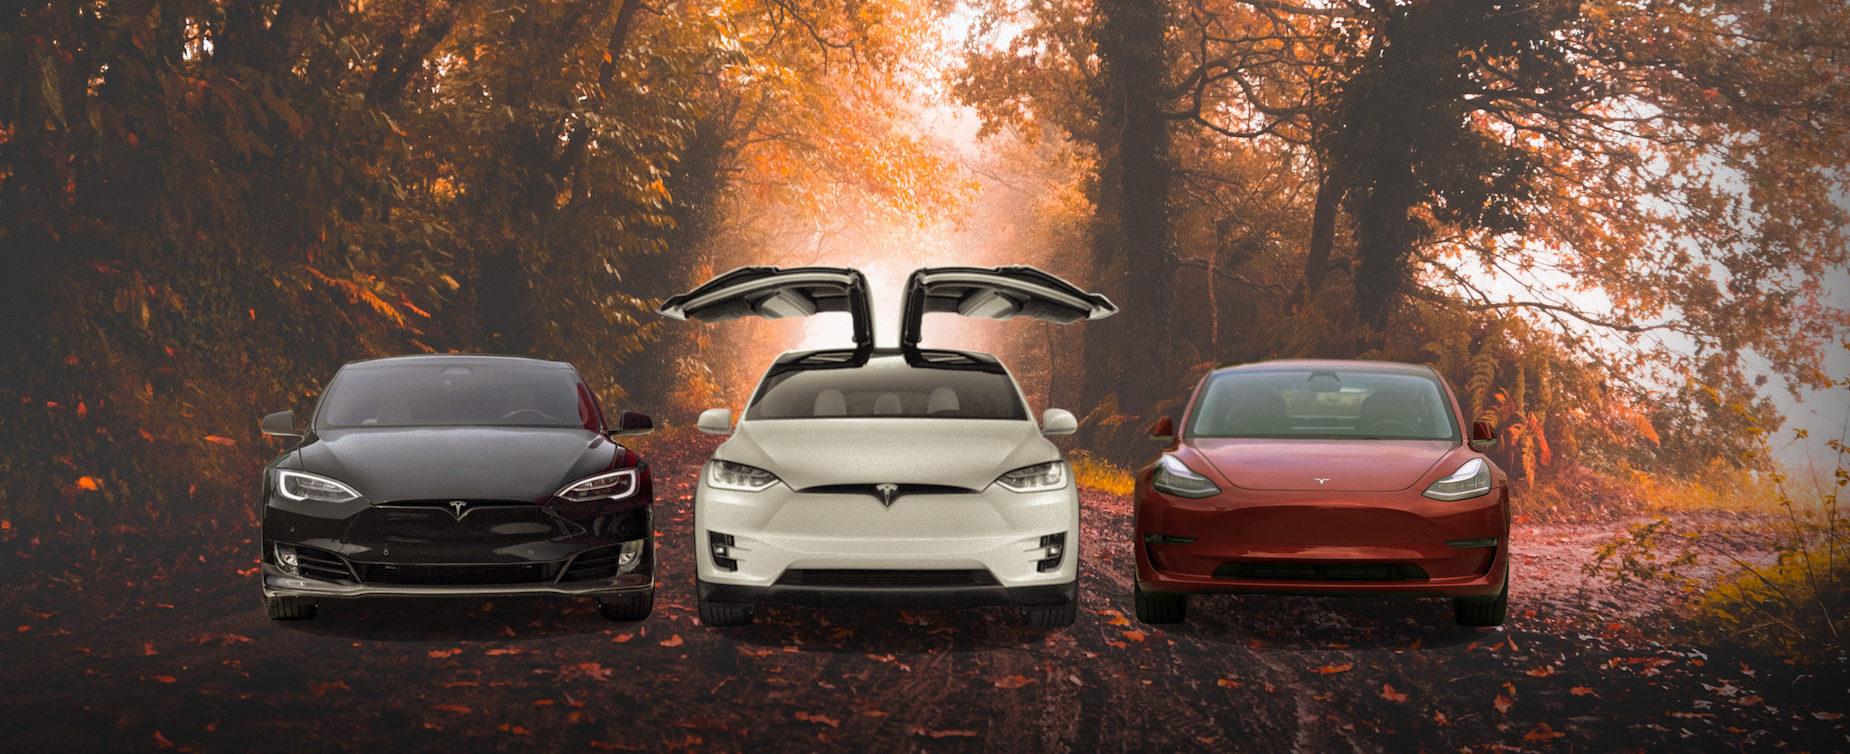 Tesla Model S X Up For Grabs As Climate Xchange Takes Carbon